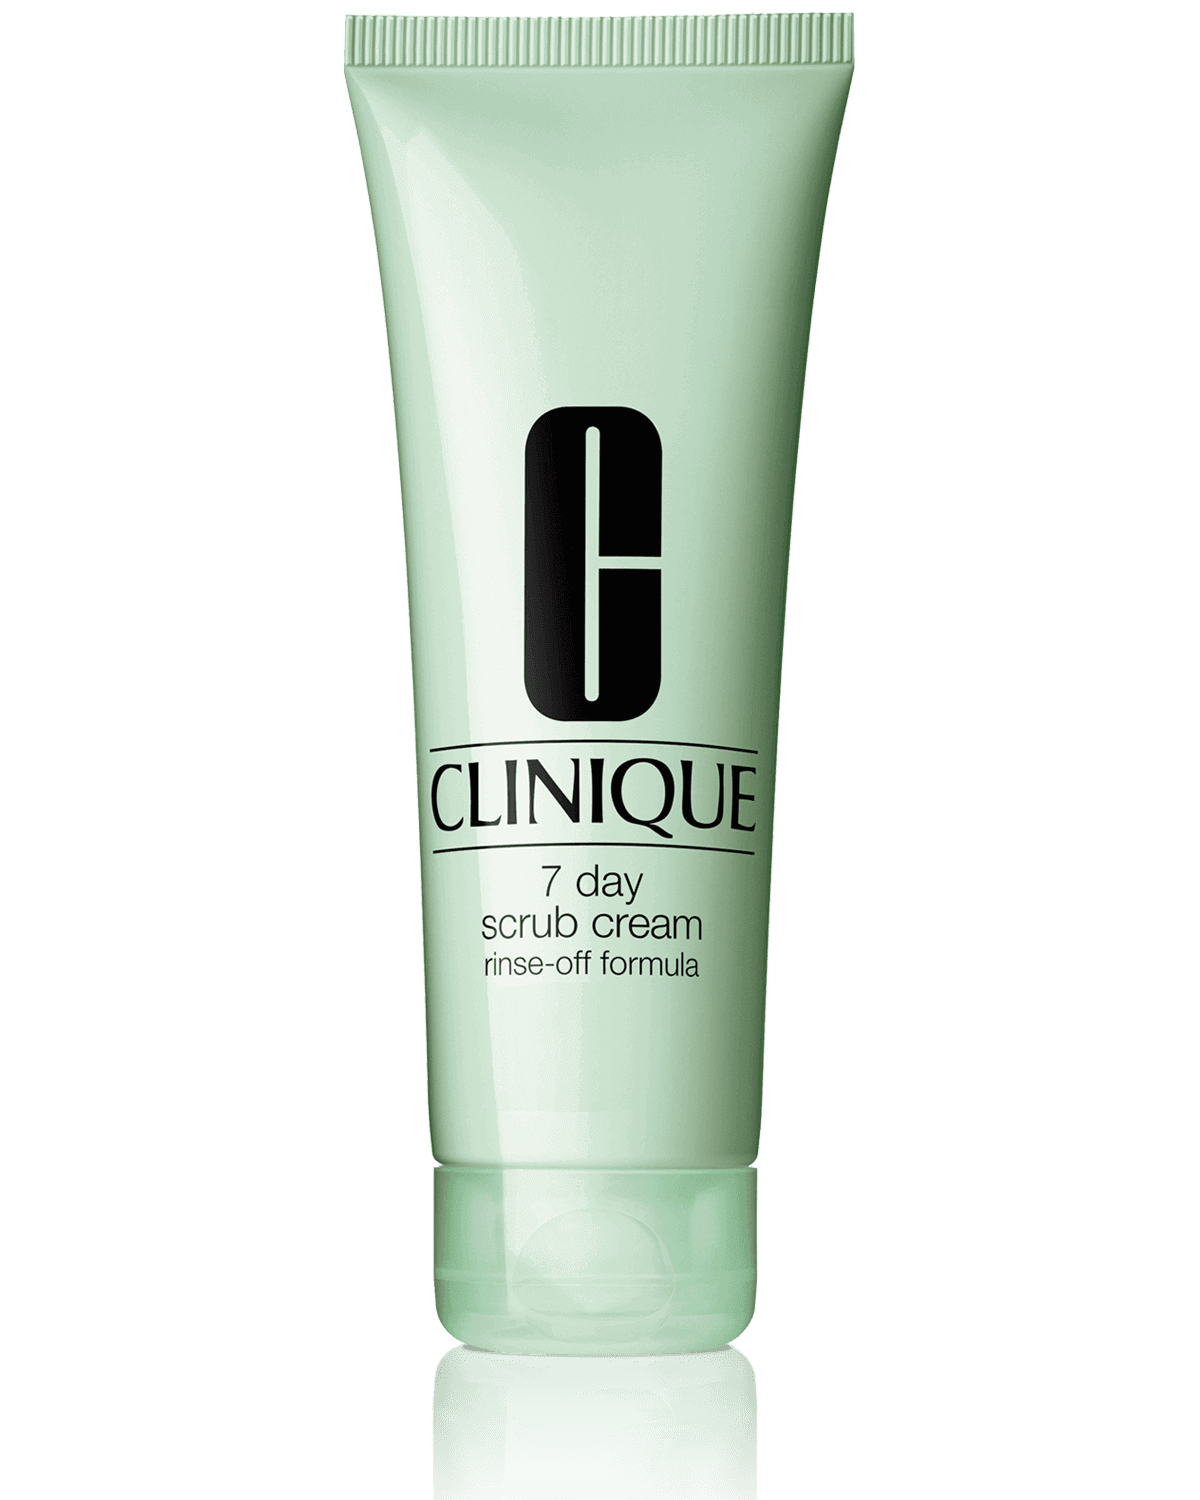 Крем-скраб Clinique 7 Day Rinse-Off Formula, 100 мл clinique 7 day scrub cream rinse off formula